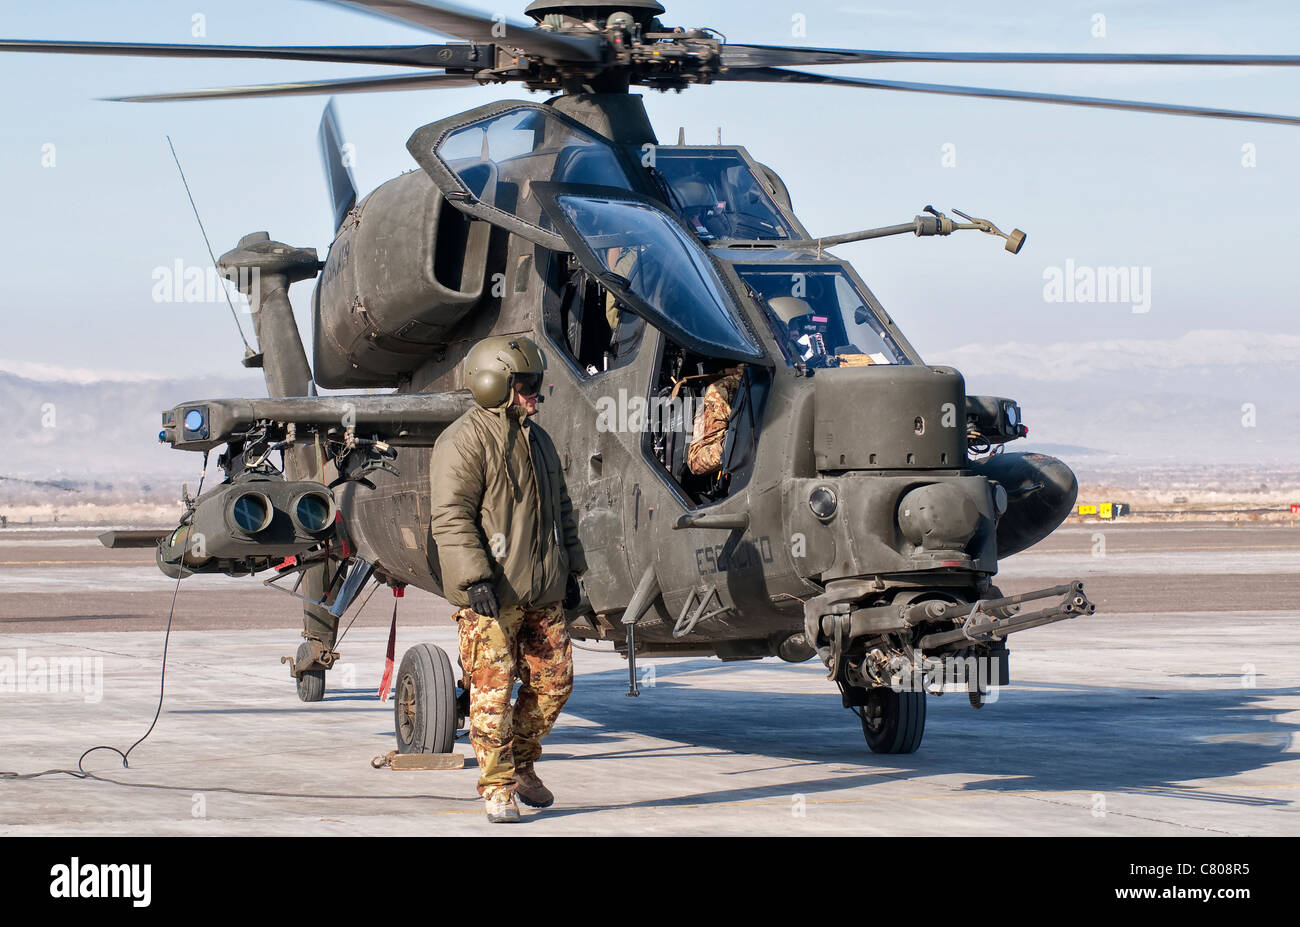 An Italian Army Agusta AW129 Mangusta attack helicopter at Forward Operating Base Herat, Regional Command West, Afghanistan. Stock Photo